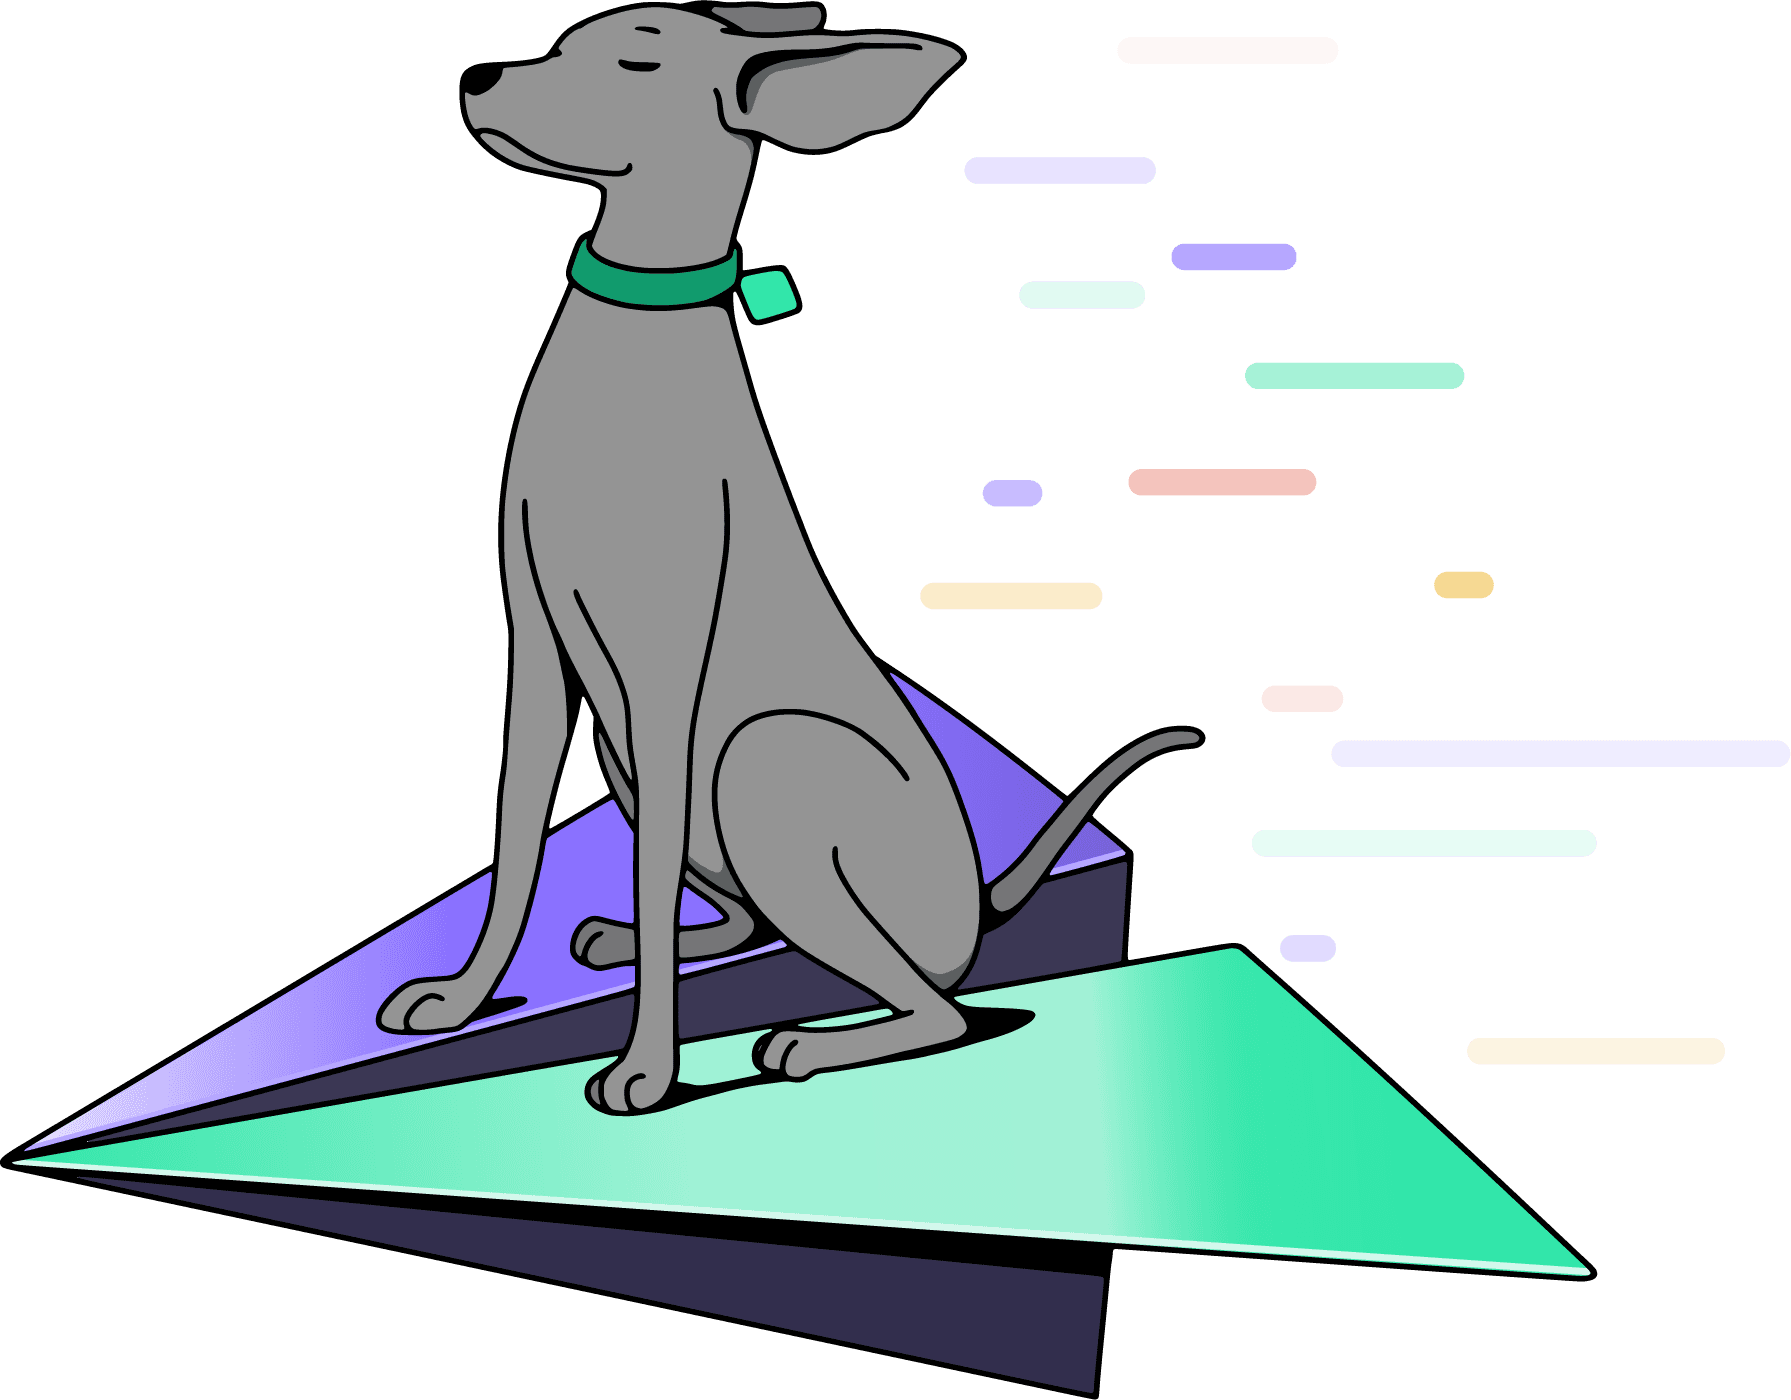 Pointer dog on paper airplane